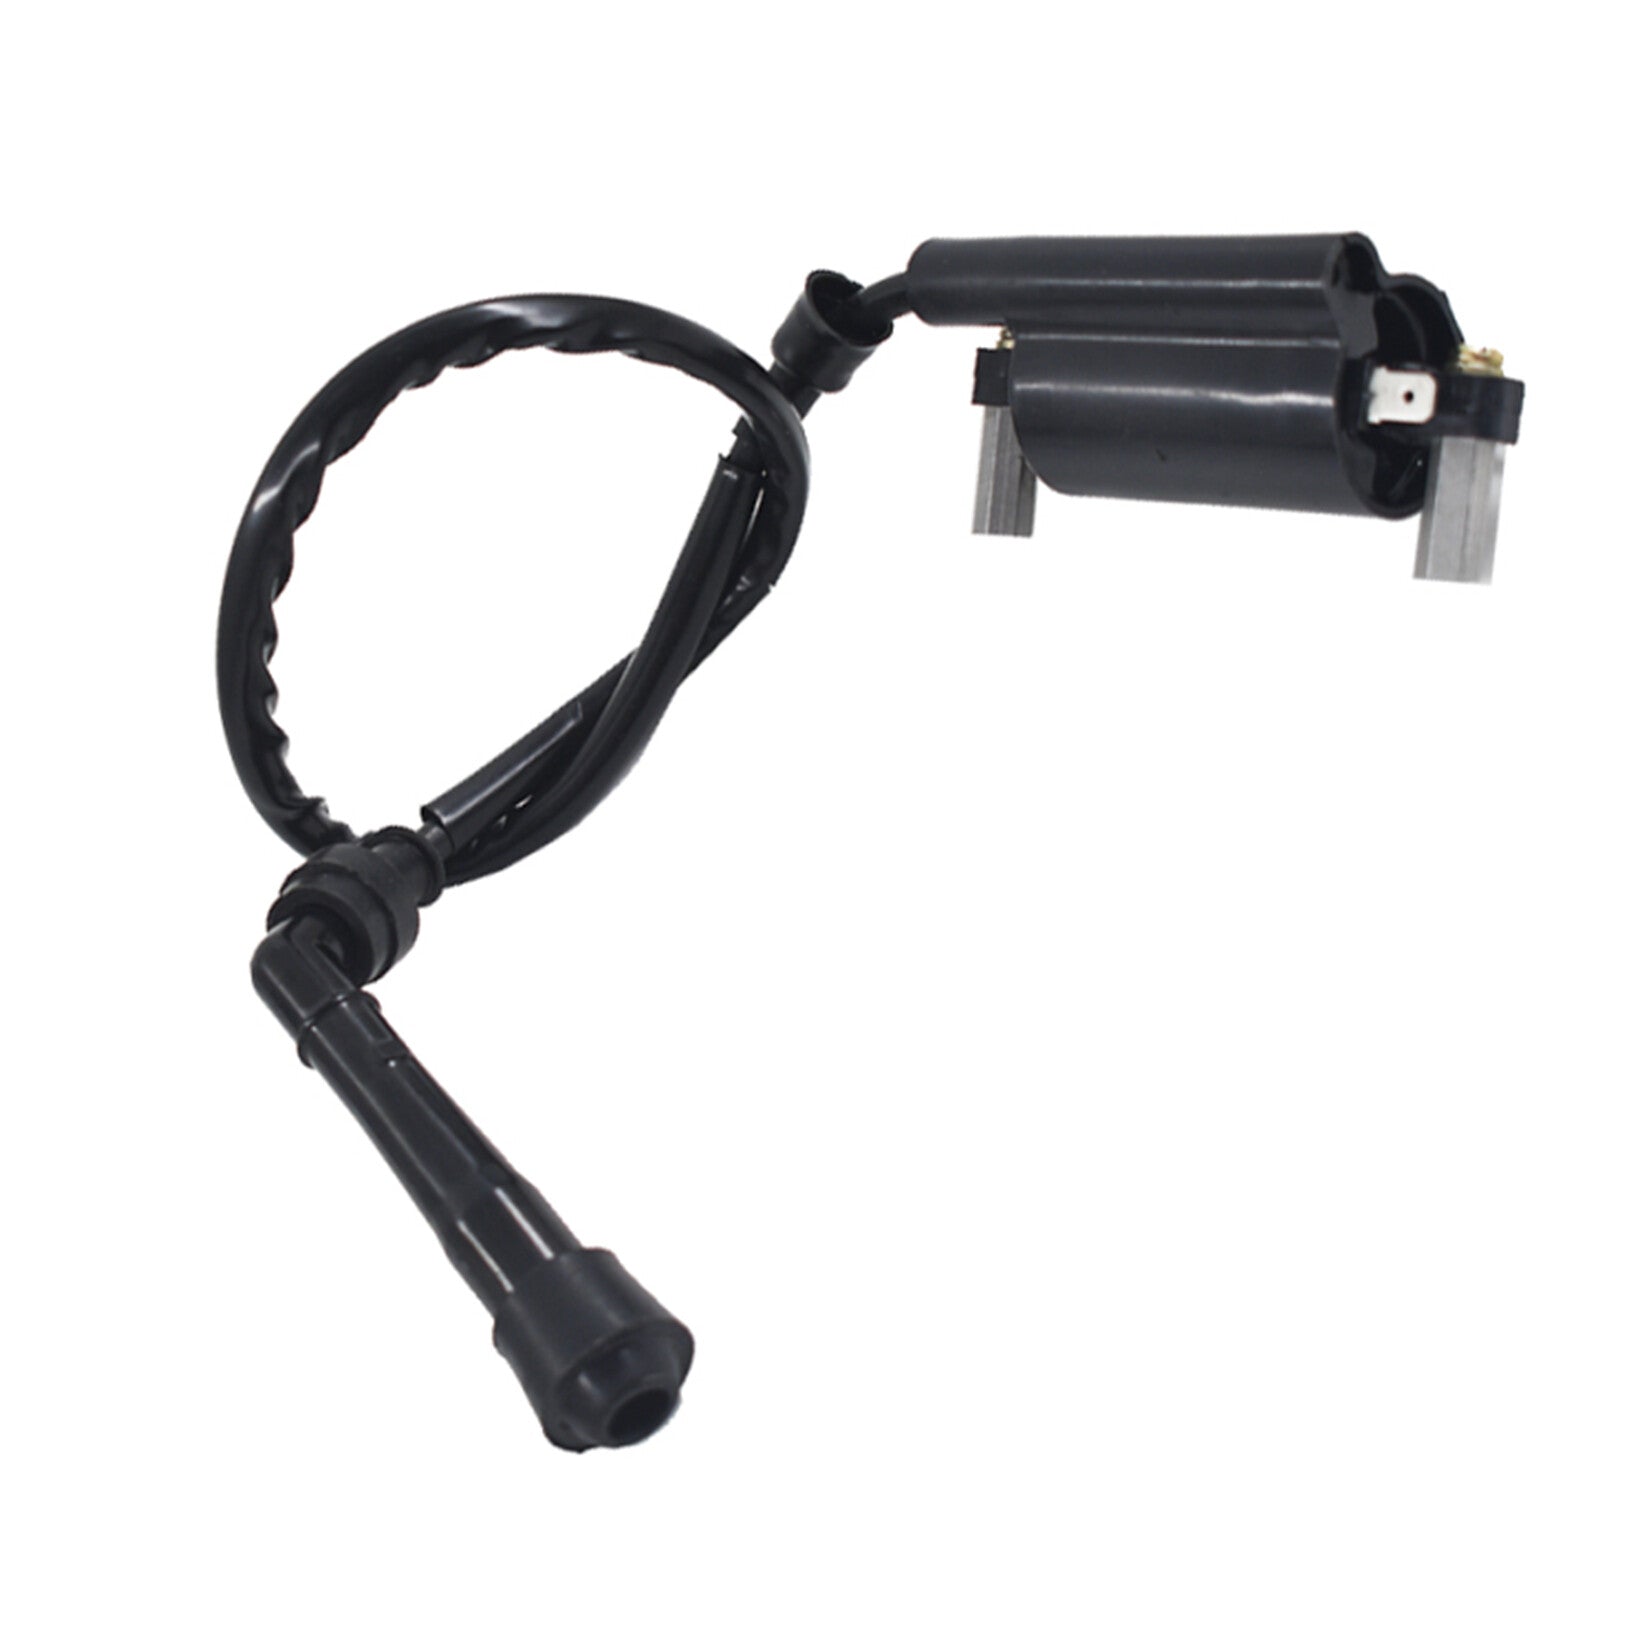 labwork Motorcycle Ignition Coil Replacement for Suzuki Savage LS650P 1986-1988 1995-2004 33410-24B00